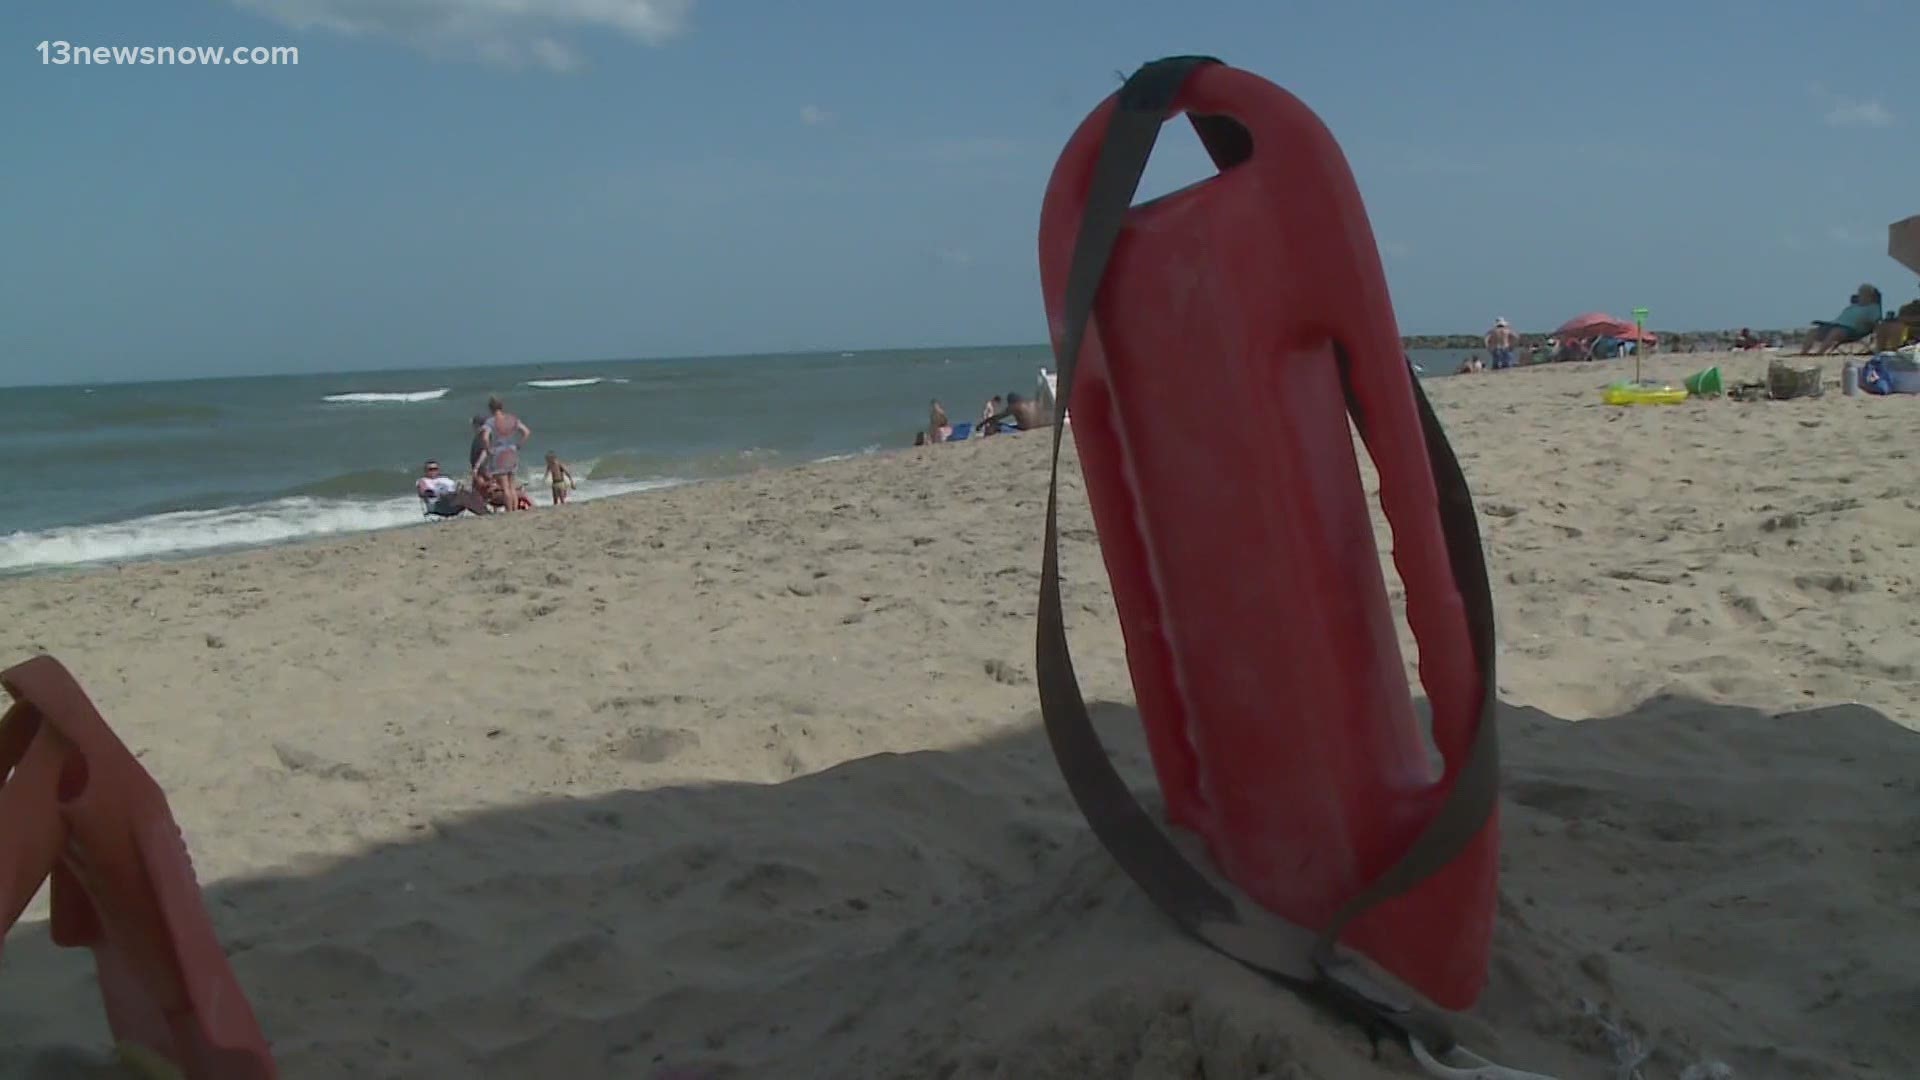 Lifeguards in Virginia Beach expected heavy rip currents well ahead of the arrival of Tropical Storm Isaias in Hampton Roads.